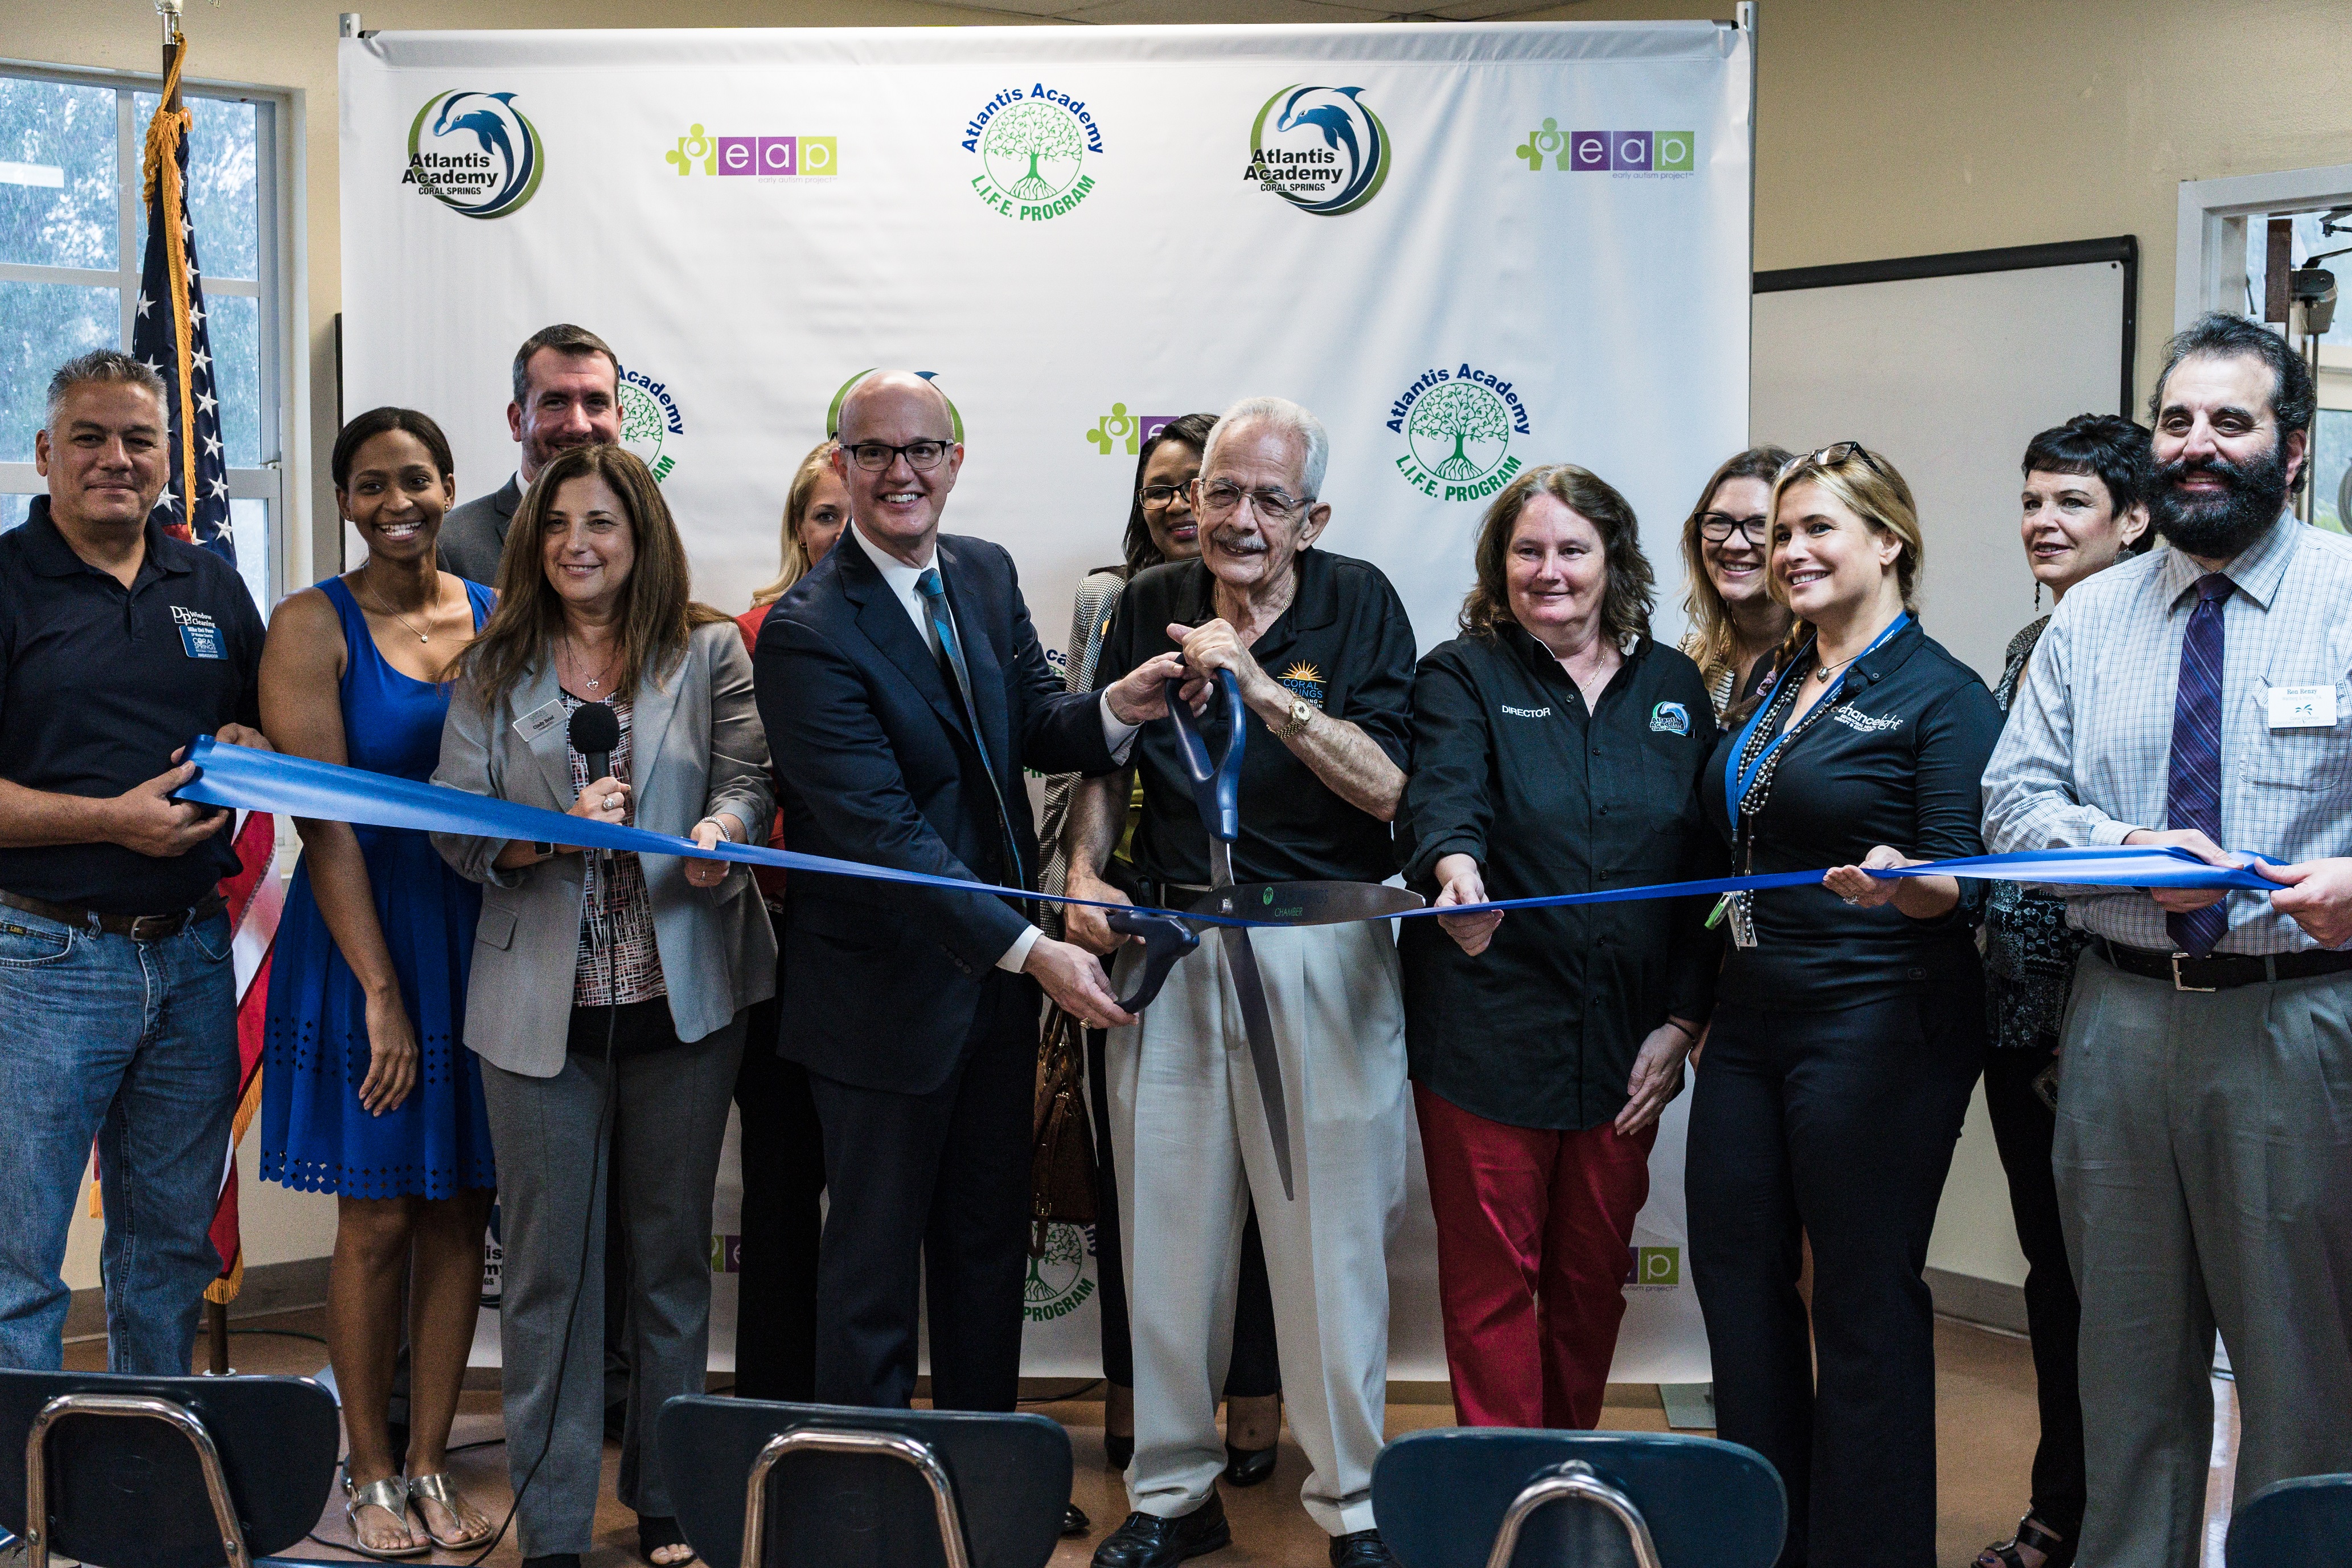 Ribbon cutting for the Atlantis Academy Early Autism Project. 